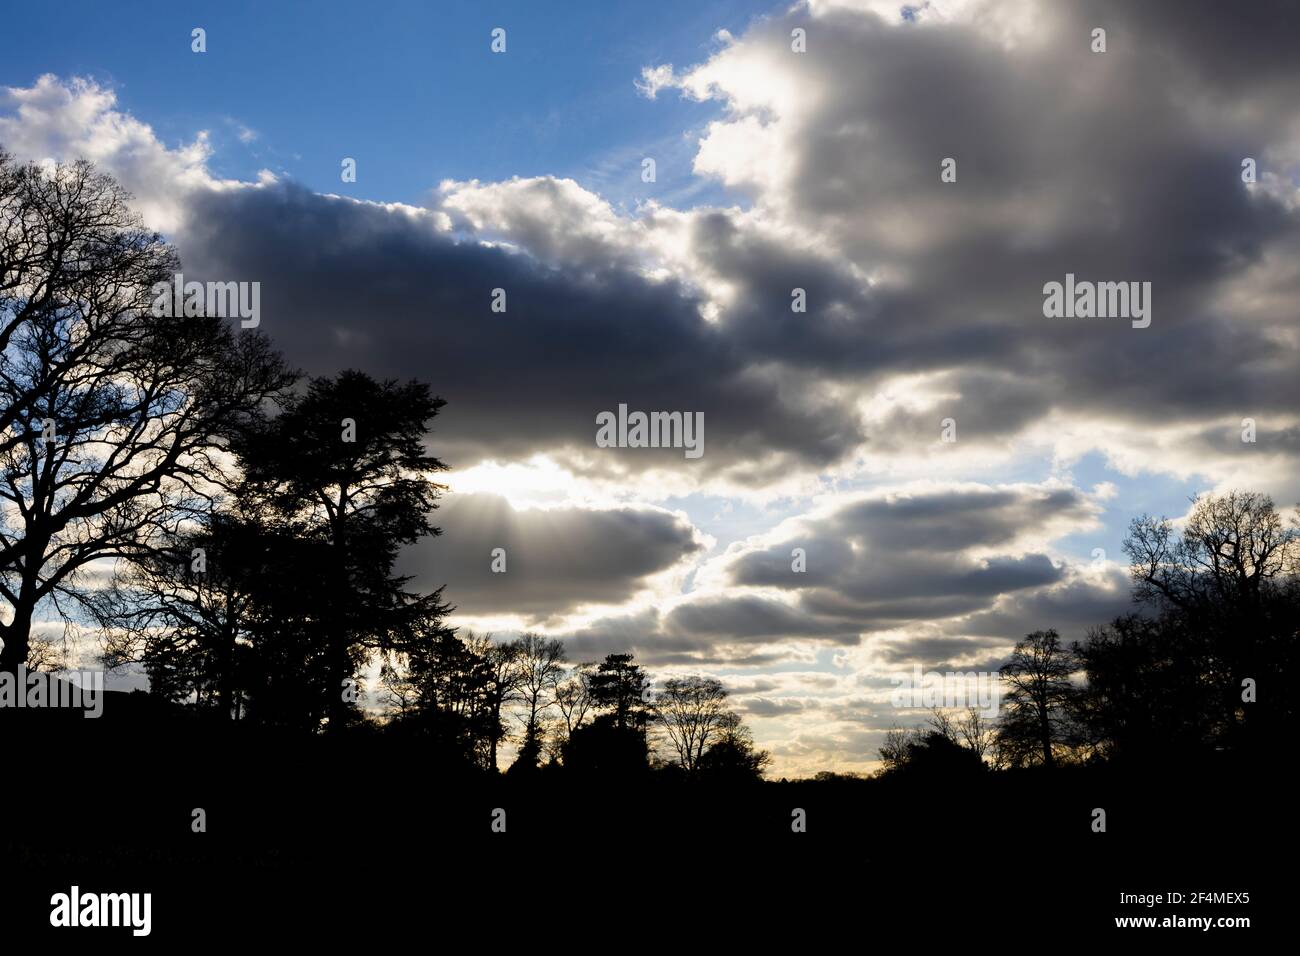 Dark clouds with white edging against a blue sky with tree silhouettes in afternoon winter light at RHS Garden, Wisley, Surrey, south-east England Stock Photo